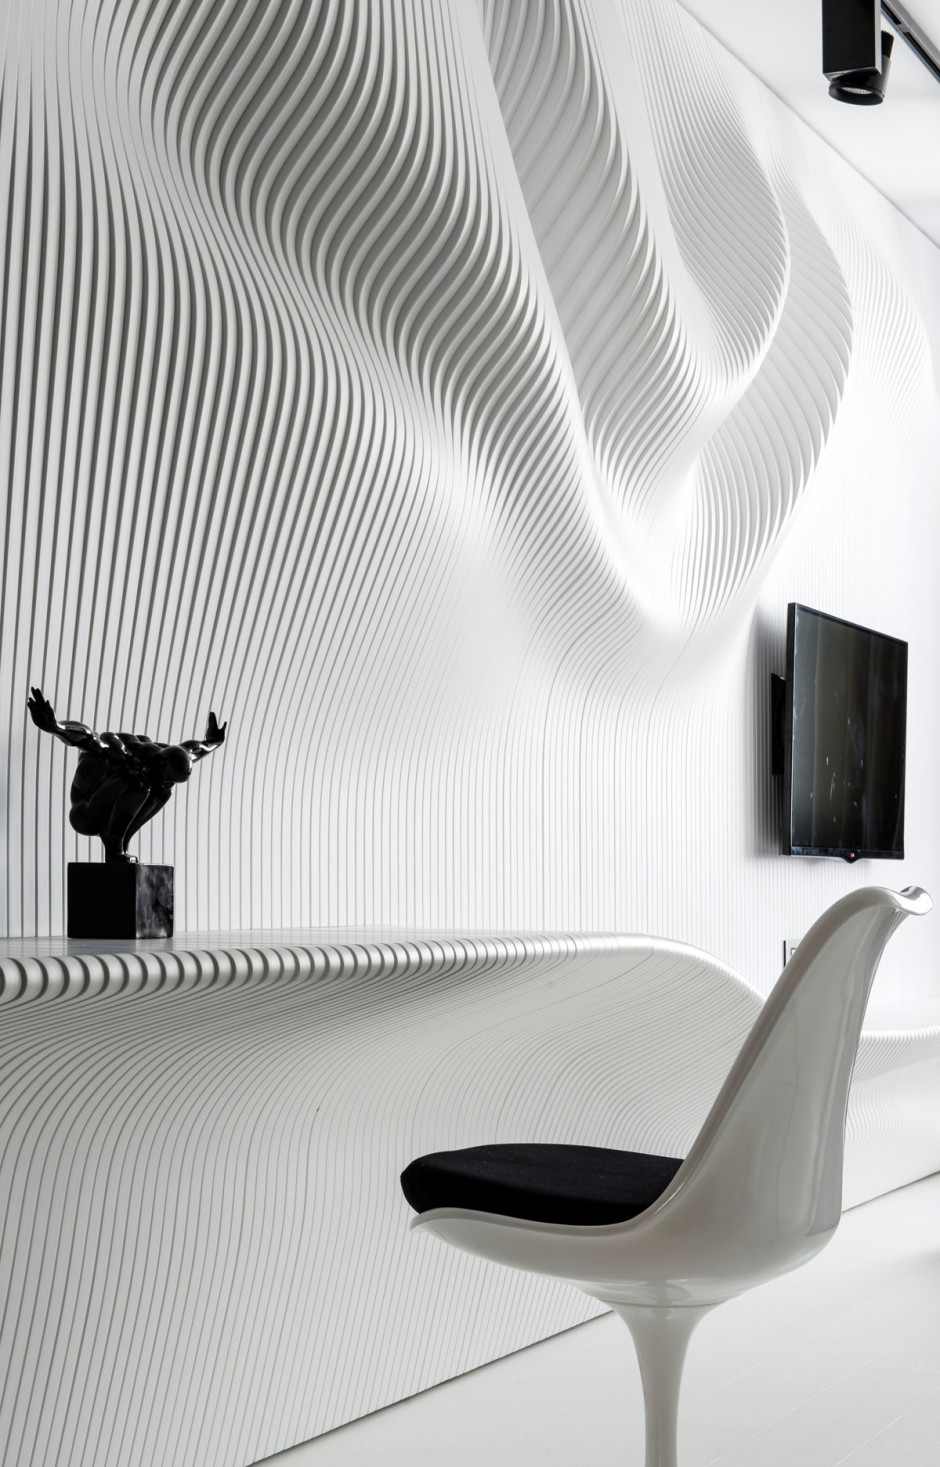 Bedroom Design With Enchanting Bedroom Design Futuristic Bedroom With White Colored Wooden Curvy Wall And Black Pendant Lamps Dream Homes 10 Stunning Black And White Bedroom Ideas In Fall Color Accent